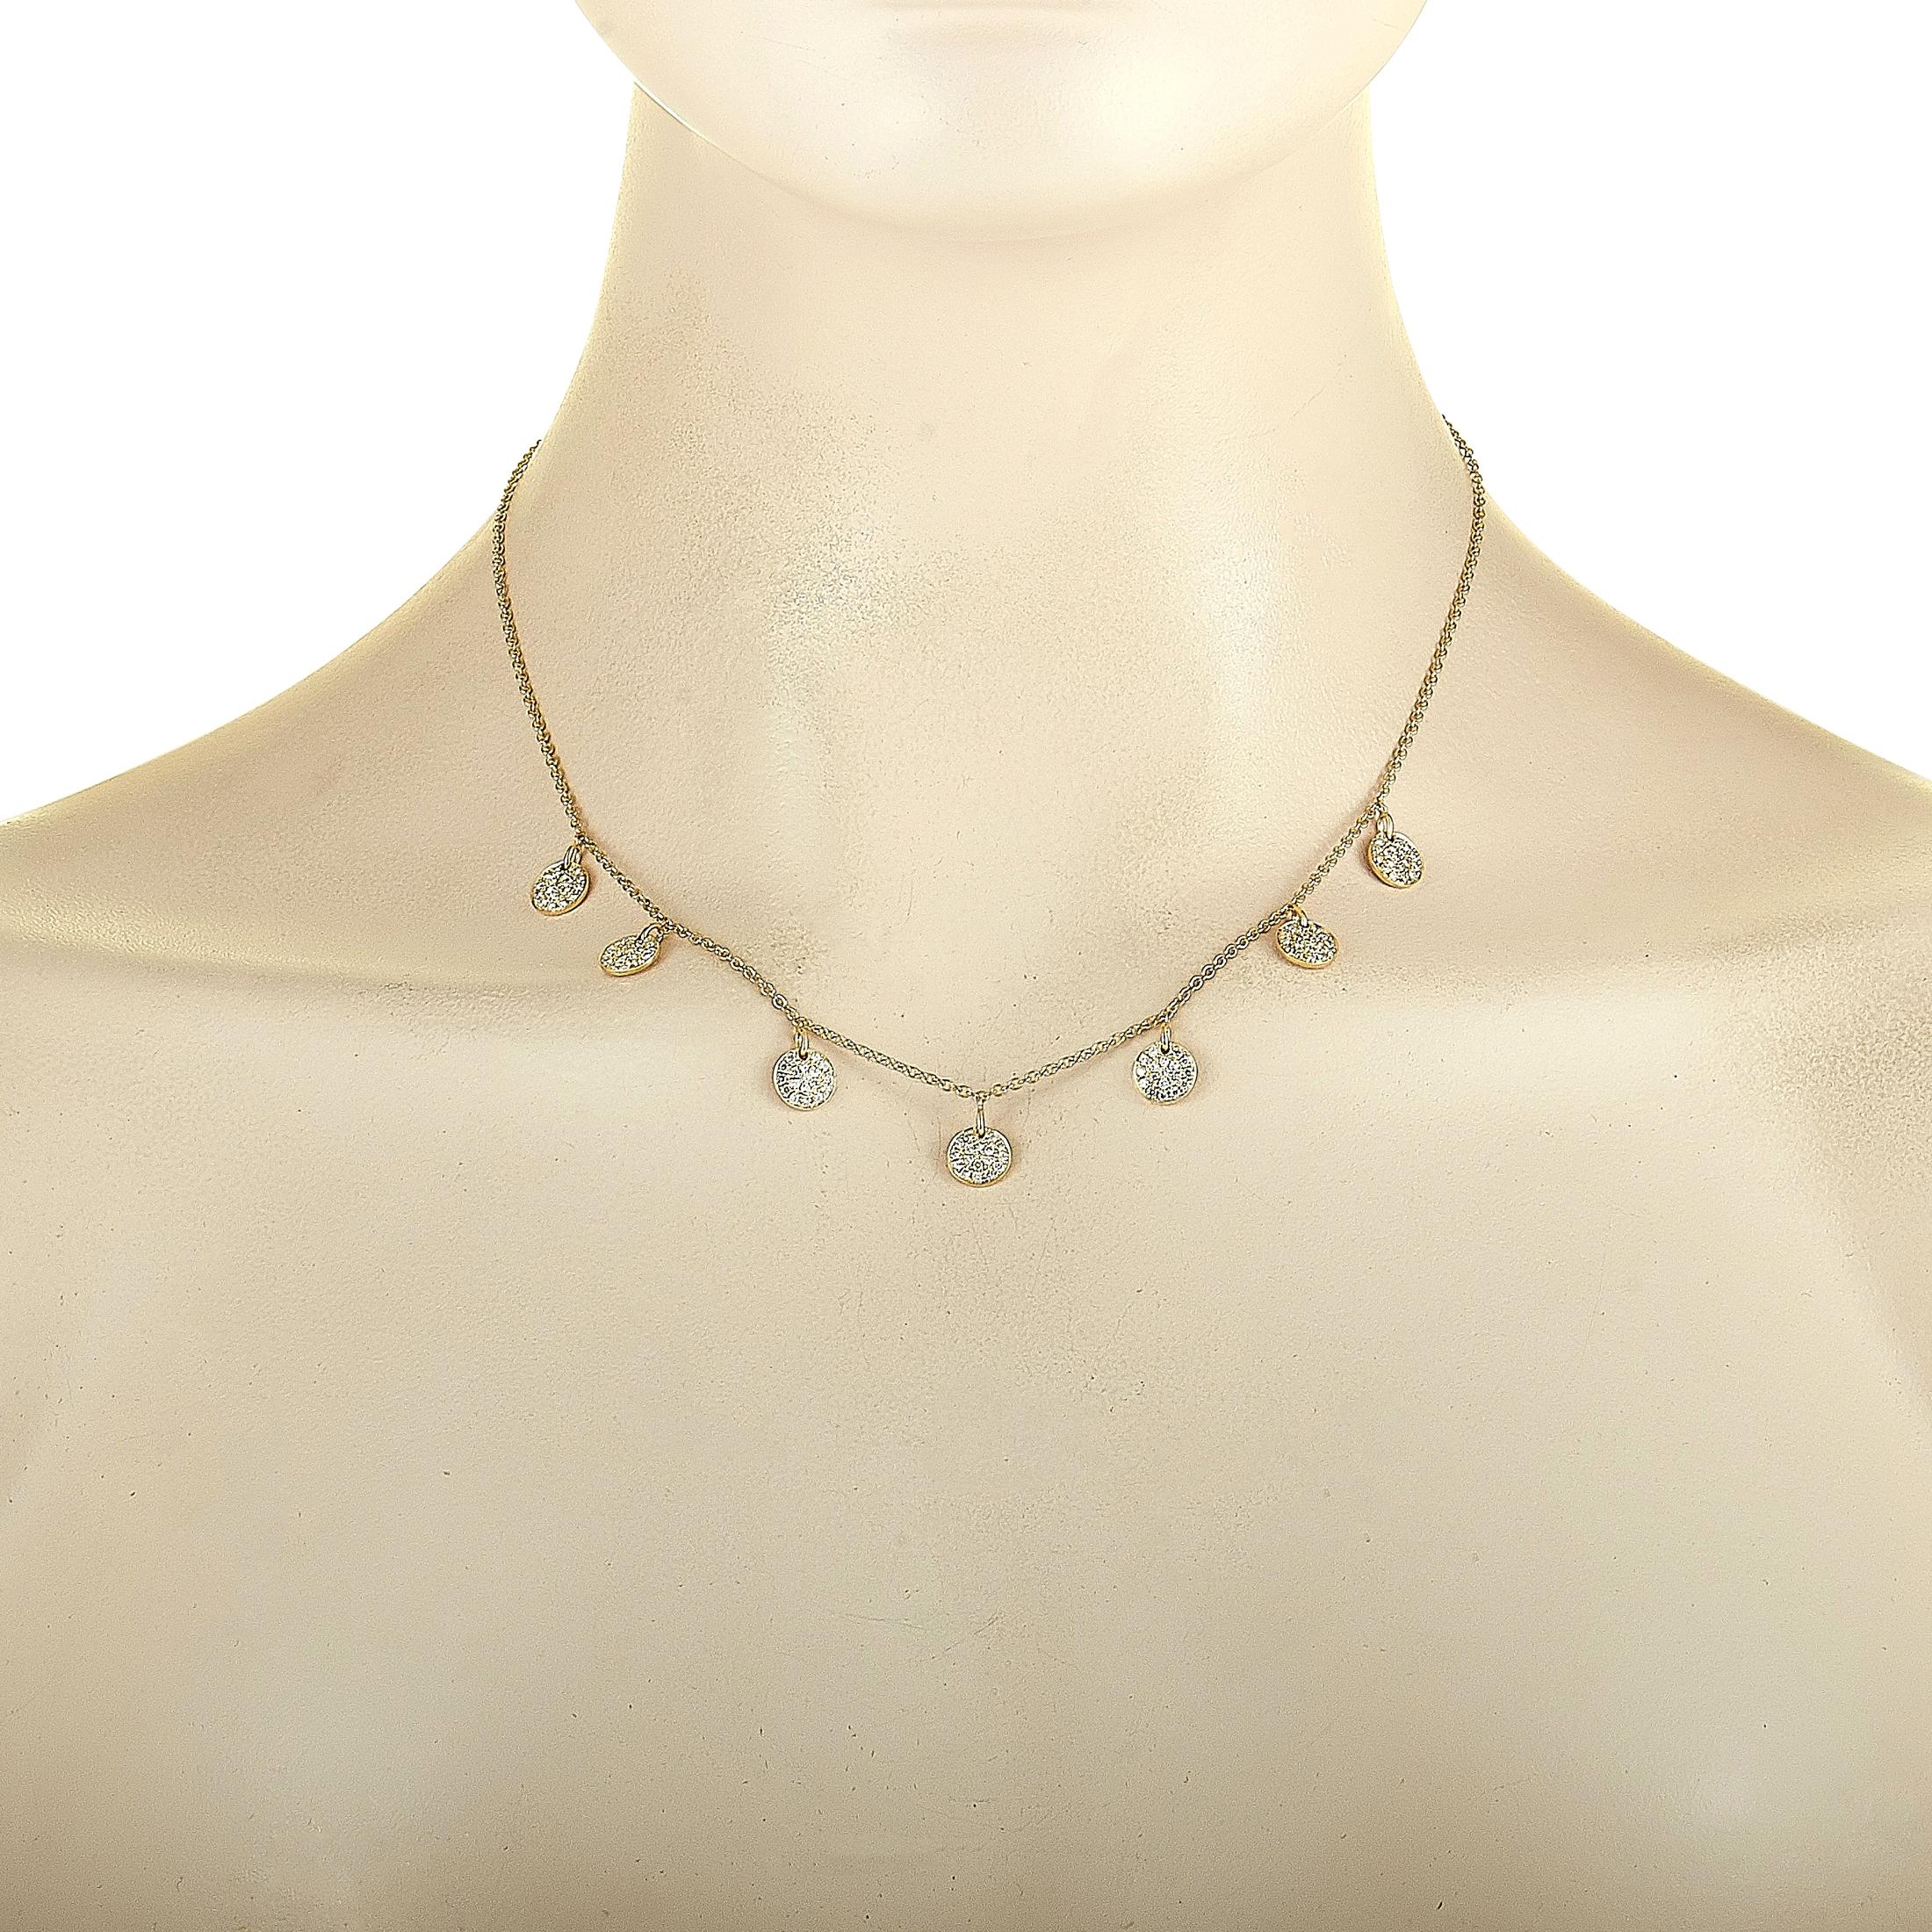 This LB Exclusive necklace is made out of 18K yellow gold and diamonds that total 1.08 carats. The necklace weighs 8.3 grams and measures 17” in length.

Offered in brand new condition, this jewelry piece includes a gift box.